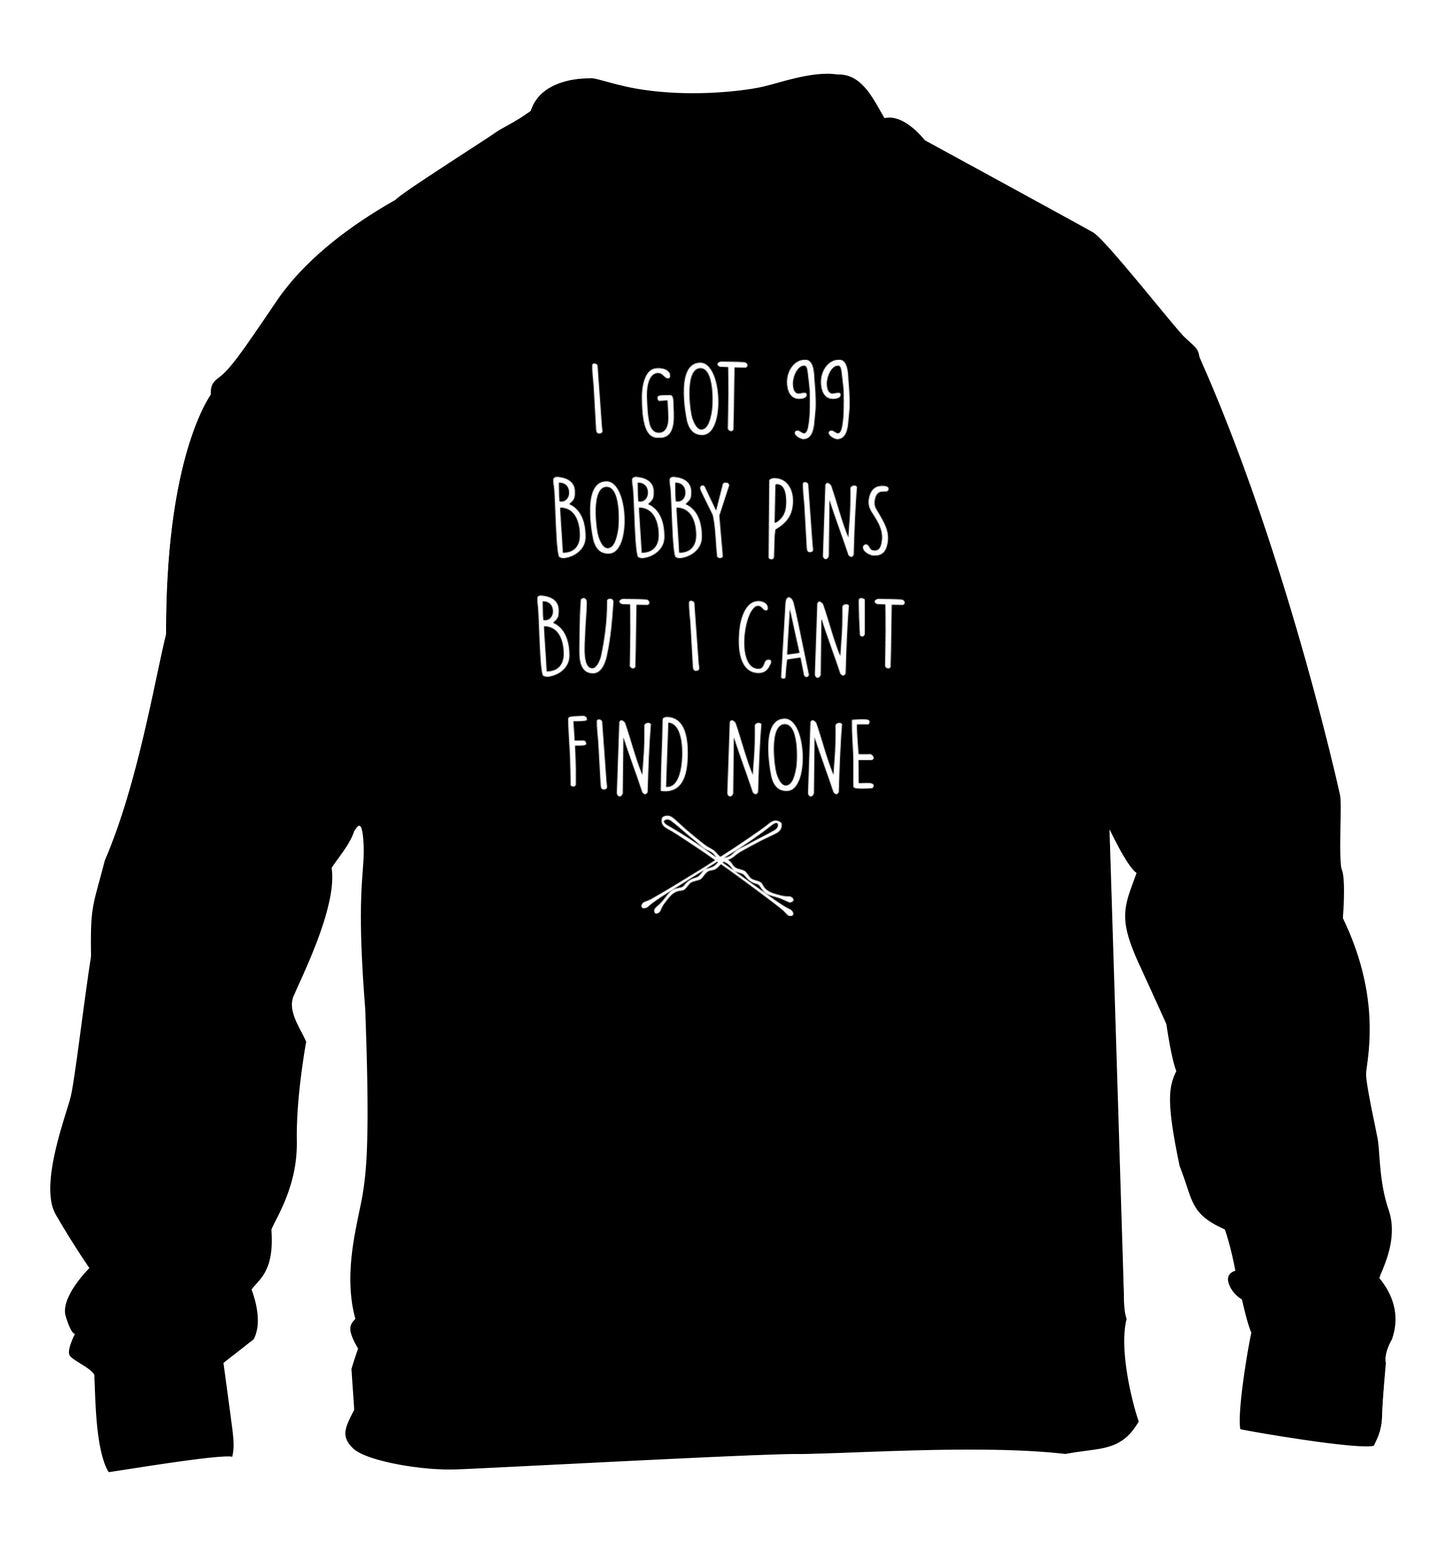 I got 99 bobby pins but I can't find none children's black sweater 12-14 Years